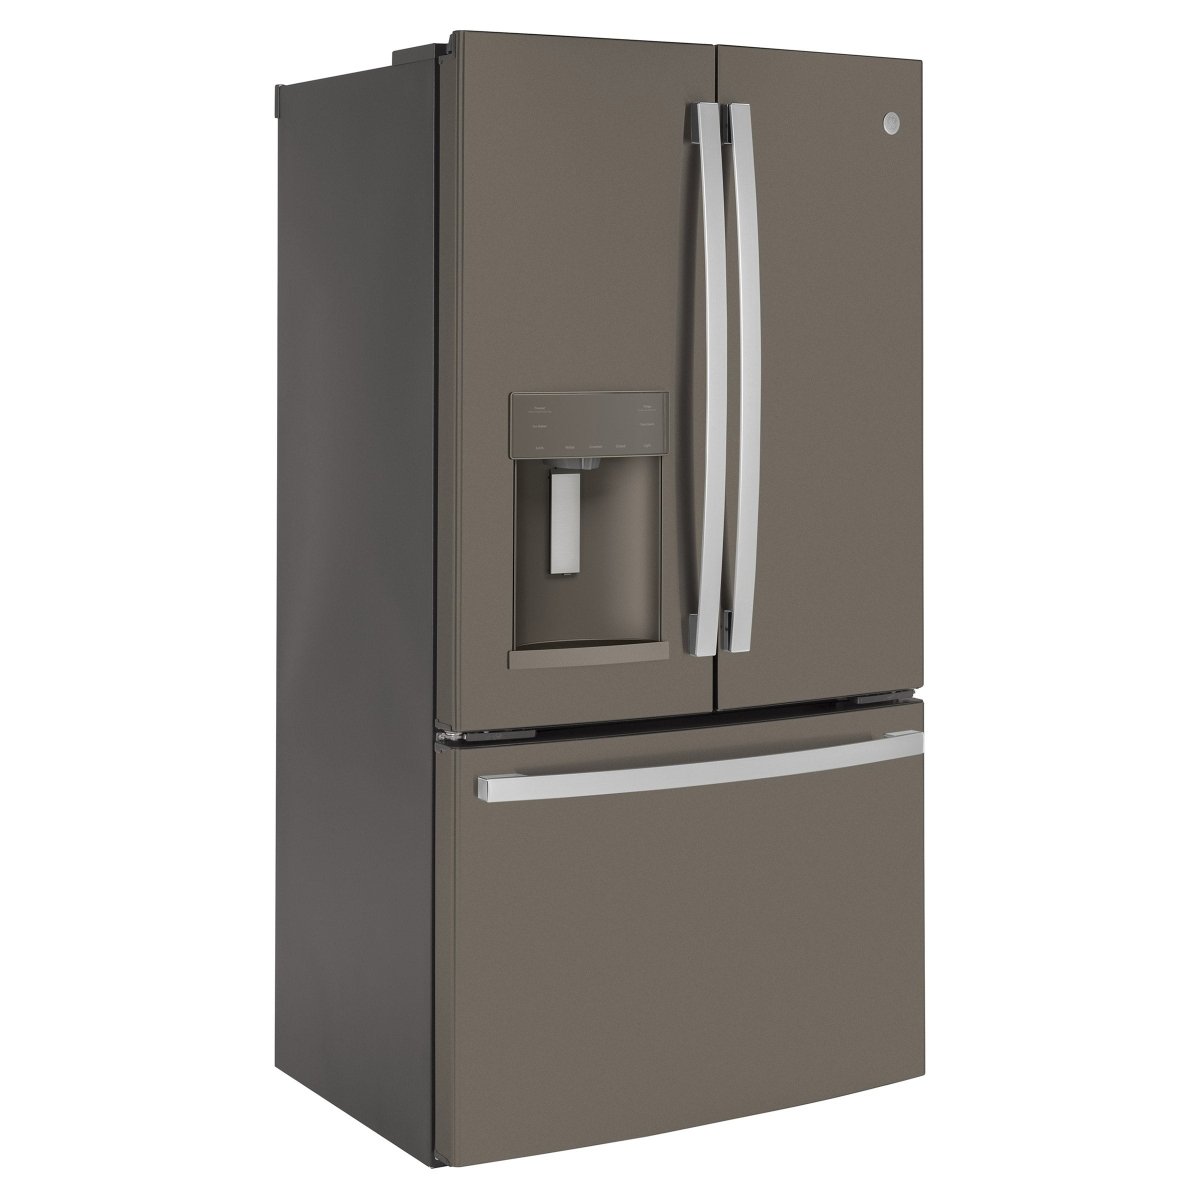 GE 22.1 Cu. Ft. Counter-Depth French Door Refrigerator with Twinchill Evaporators and Humidity Controlled Drawers - Alpine Outlets